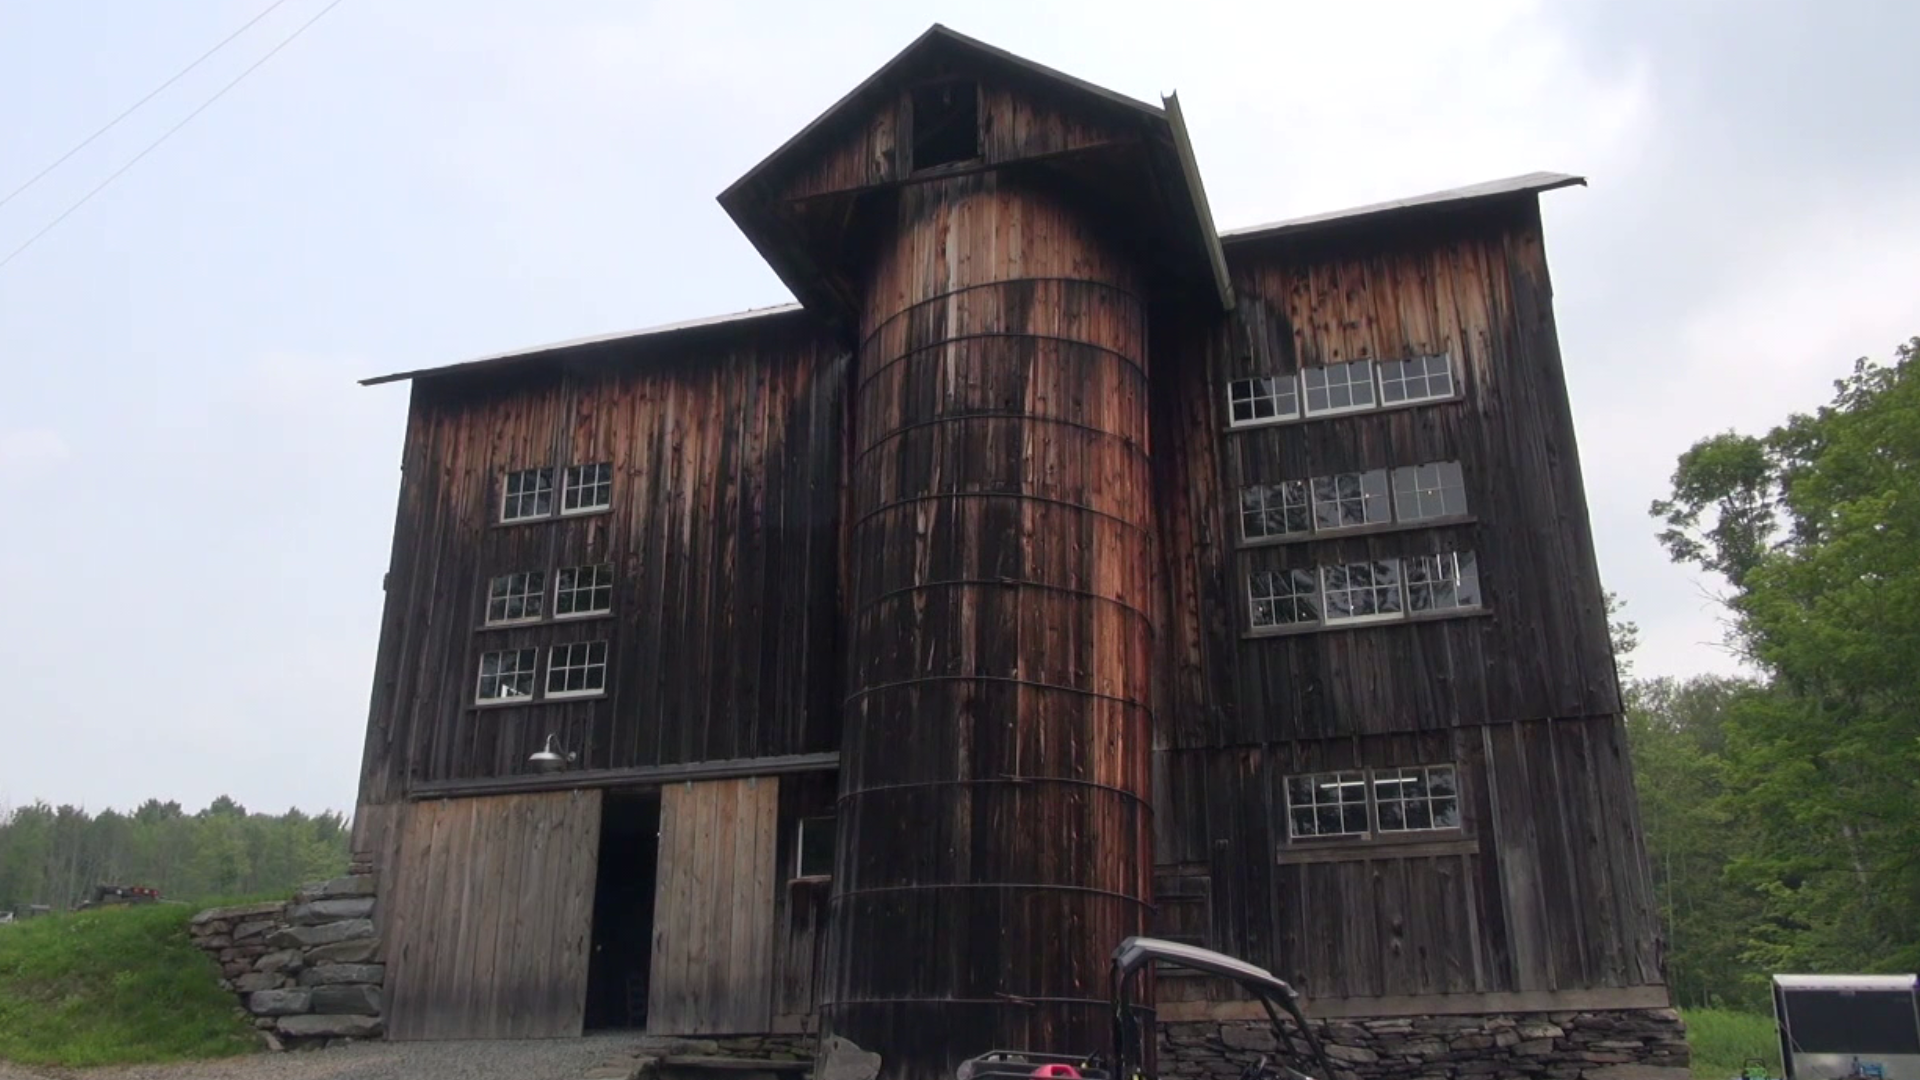 What was once an old crumbling barn on Lake Carey will soon be thrust back into the spotlight as a space that will have the spirit of the past share new memories.